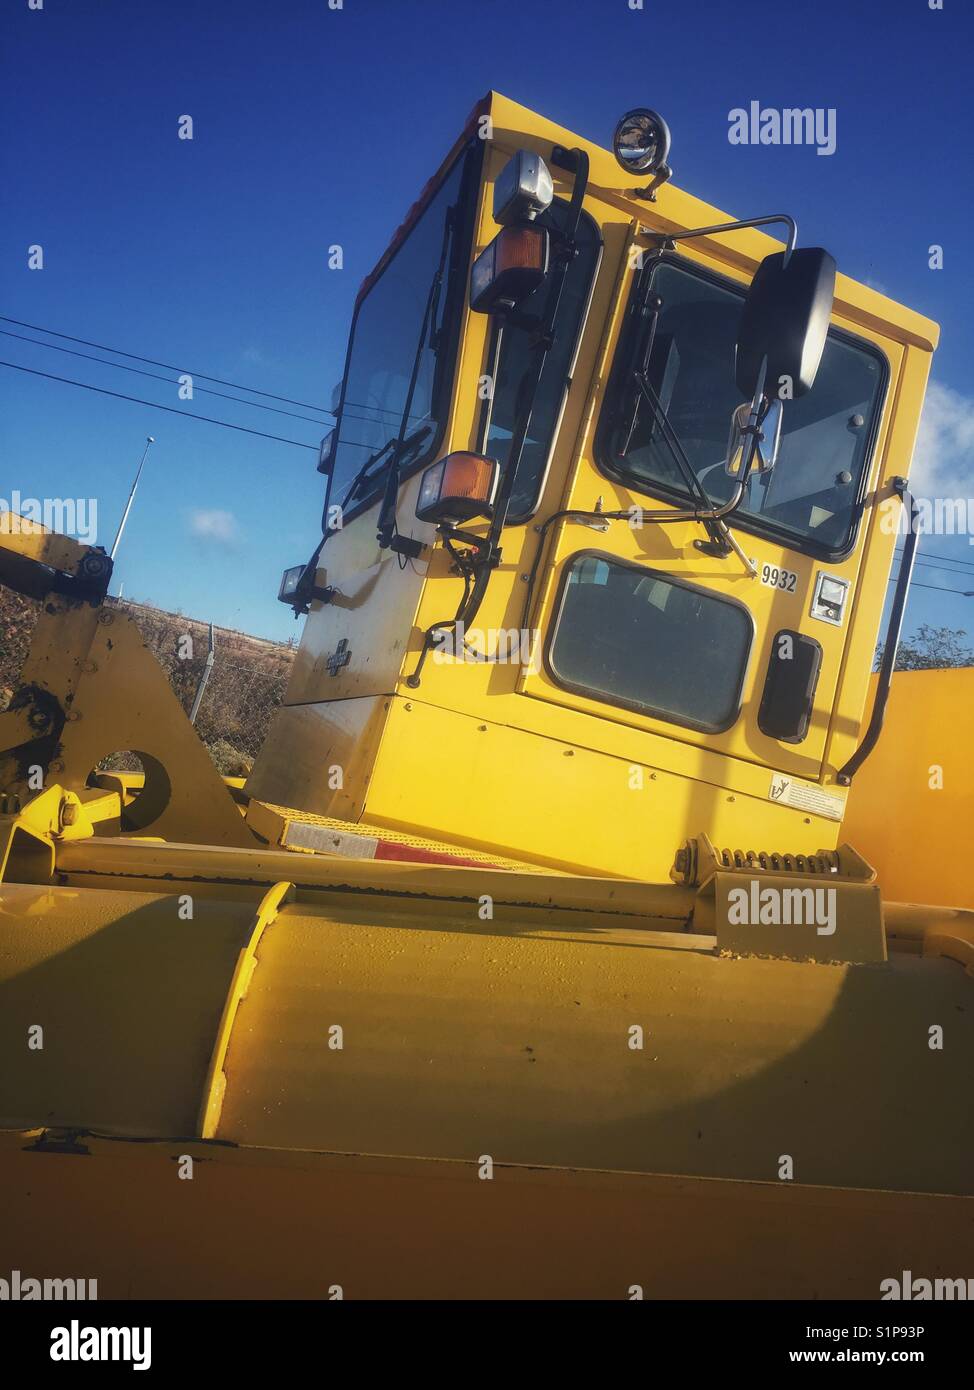 A large yellow piece of heavy machinery at an airport Stock Photo